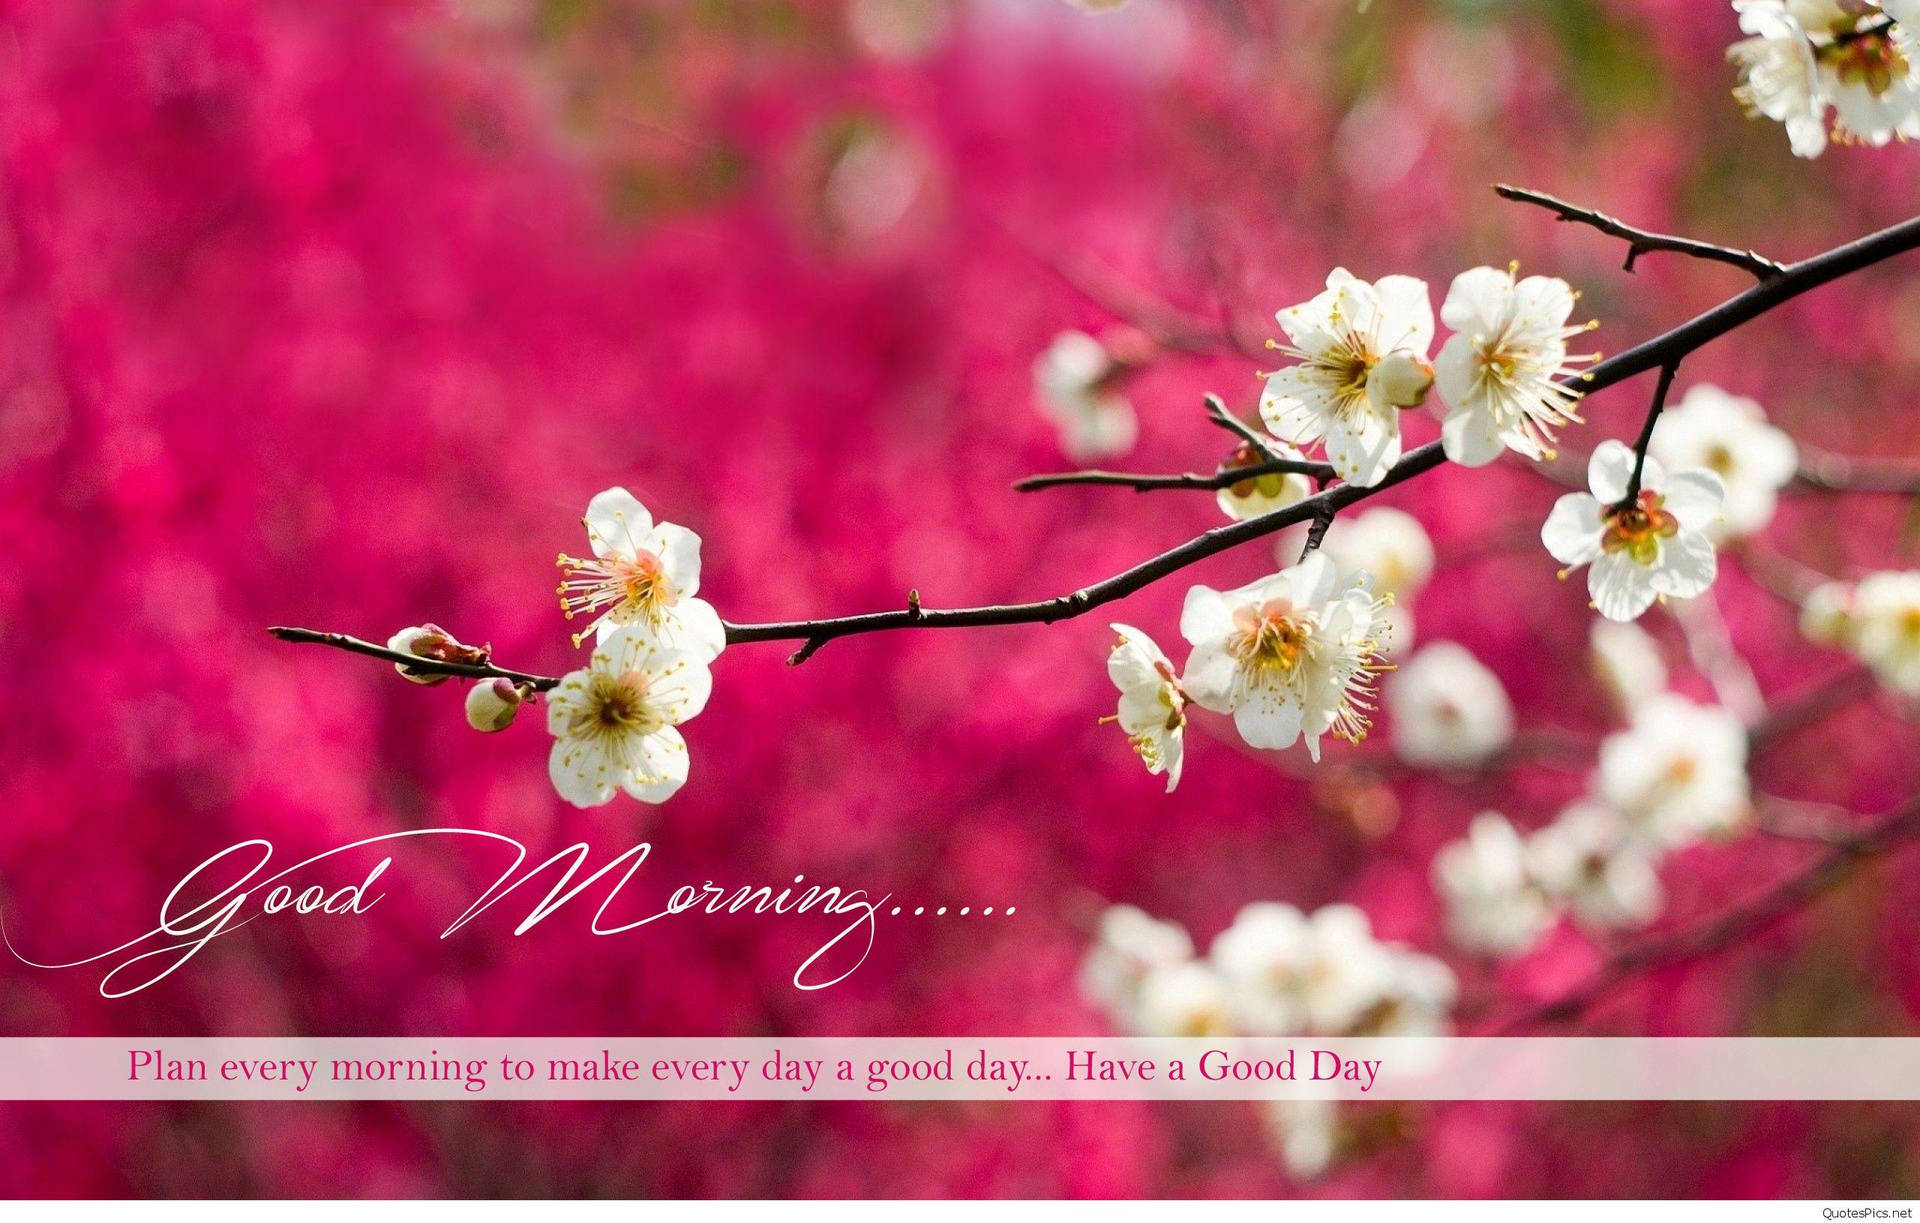 Good Morning HD With Spring White Blooms Wallpaper